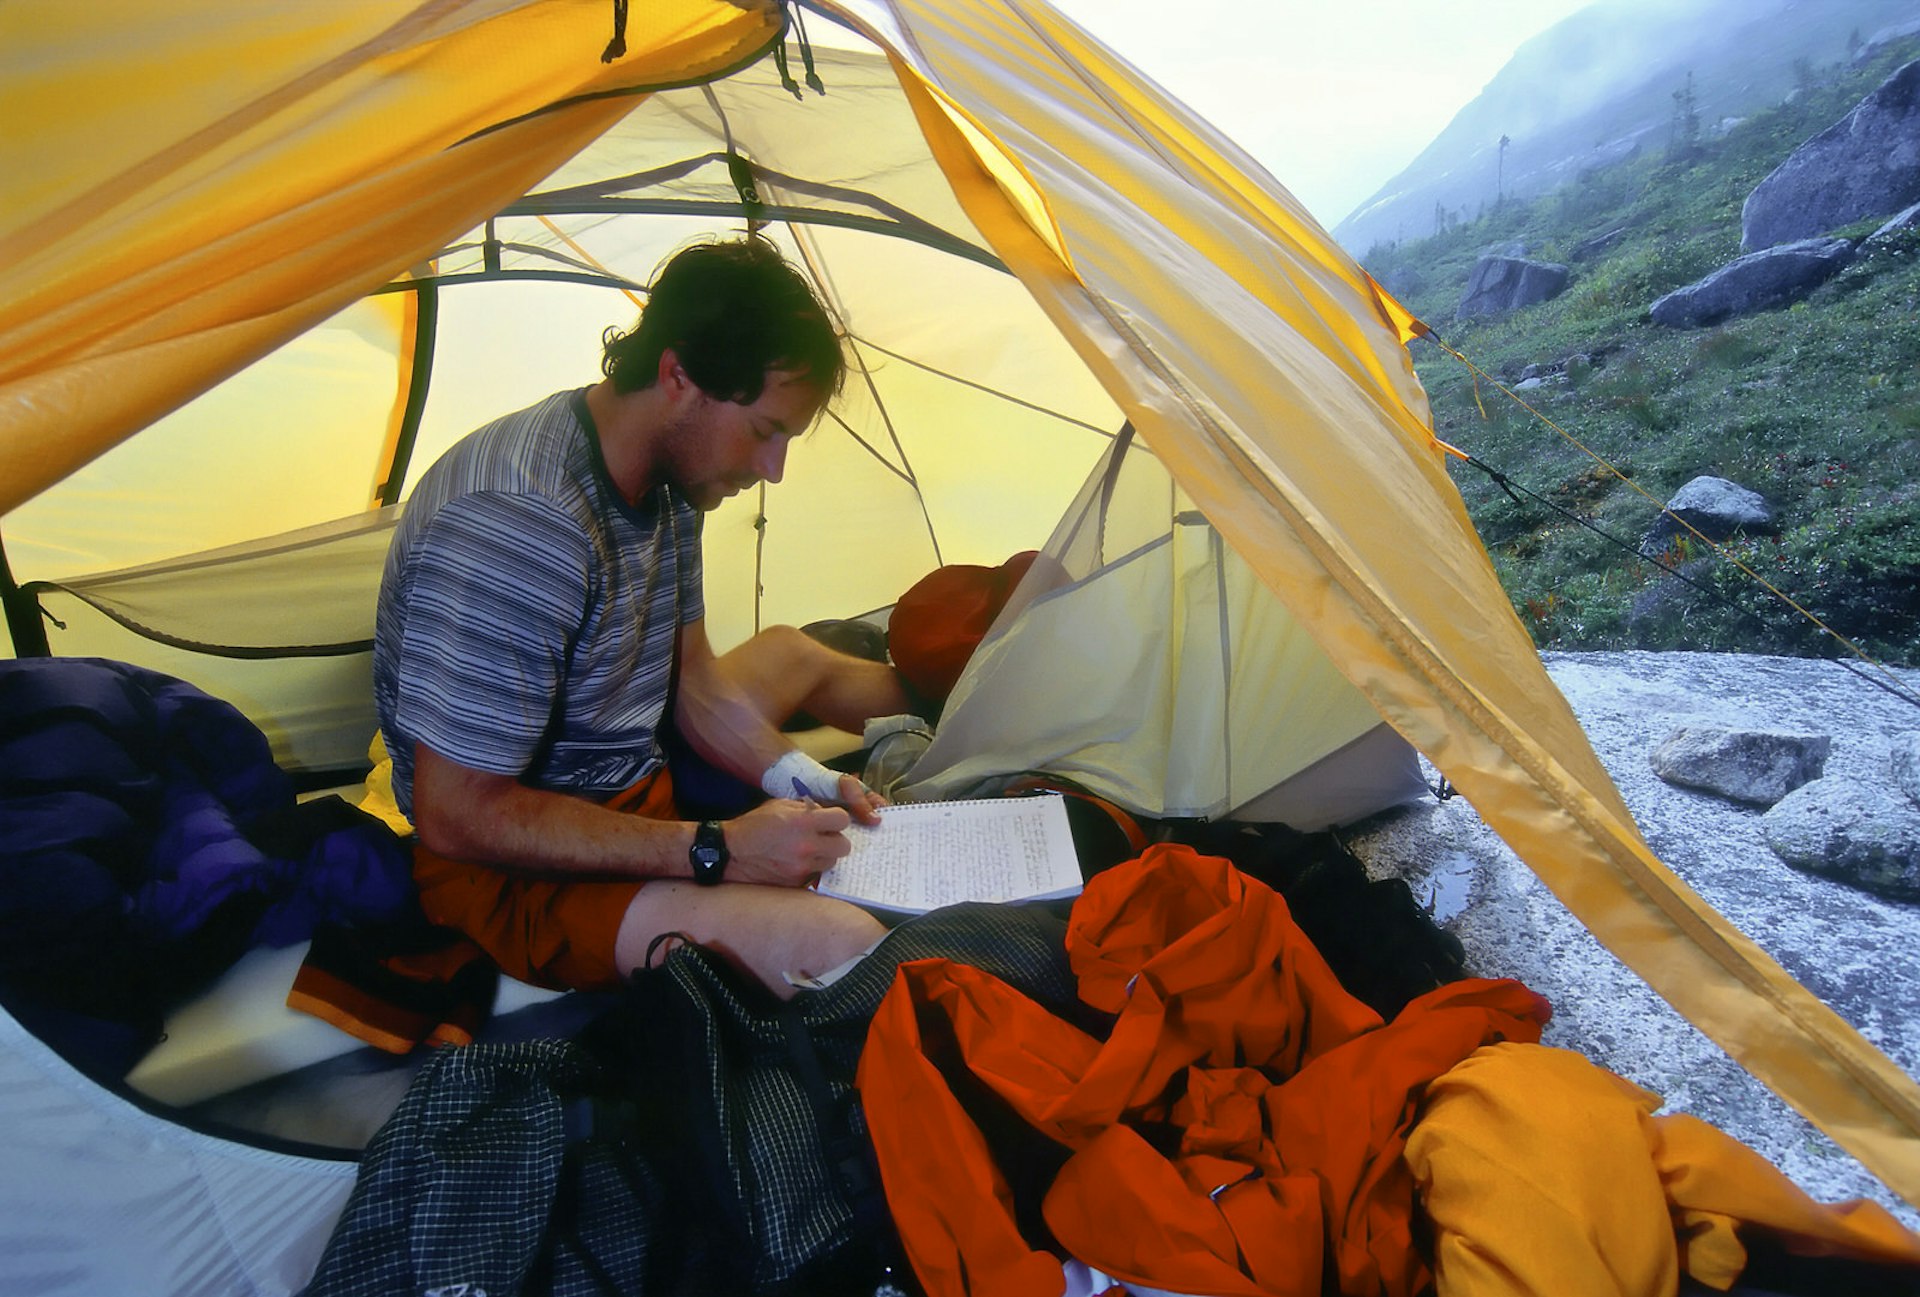 A man writing in a journal in a tent